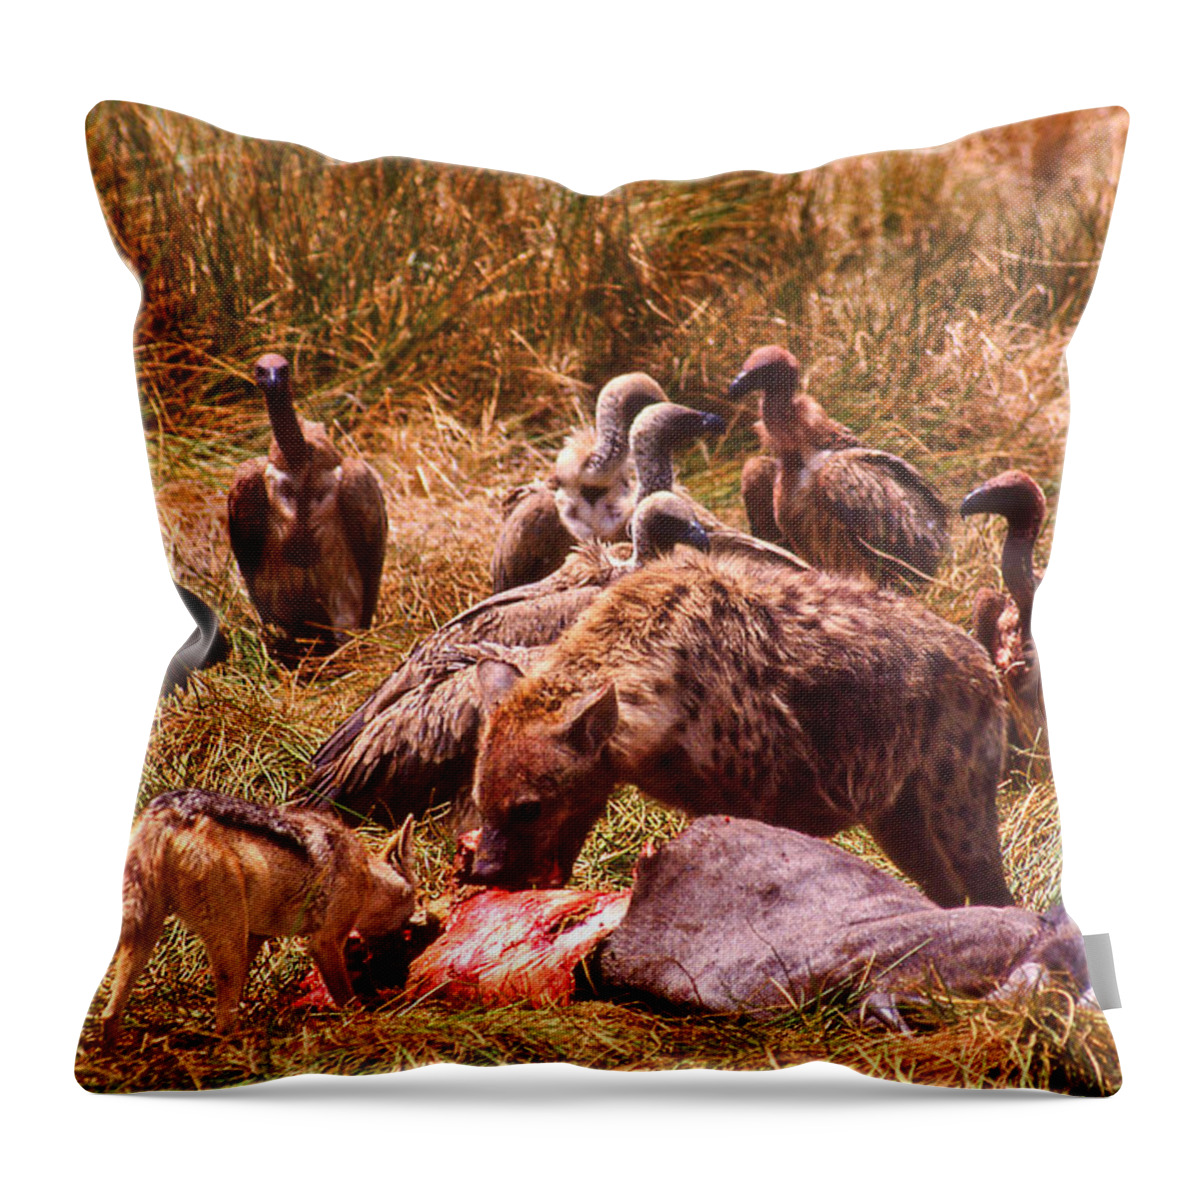 Africa Throw Pillow featuring the photograph Rest In Peace Life Goes On in Africa by Russ Considine